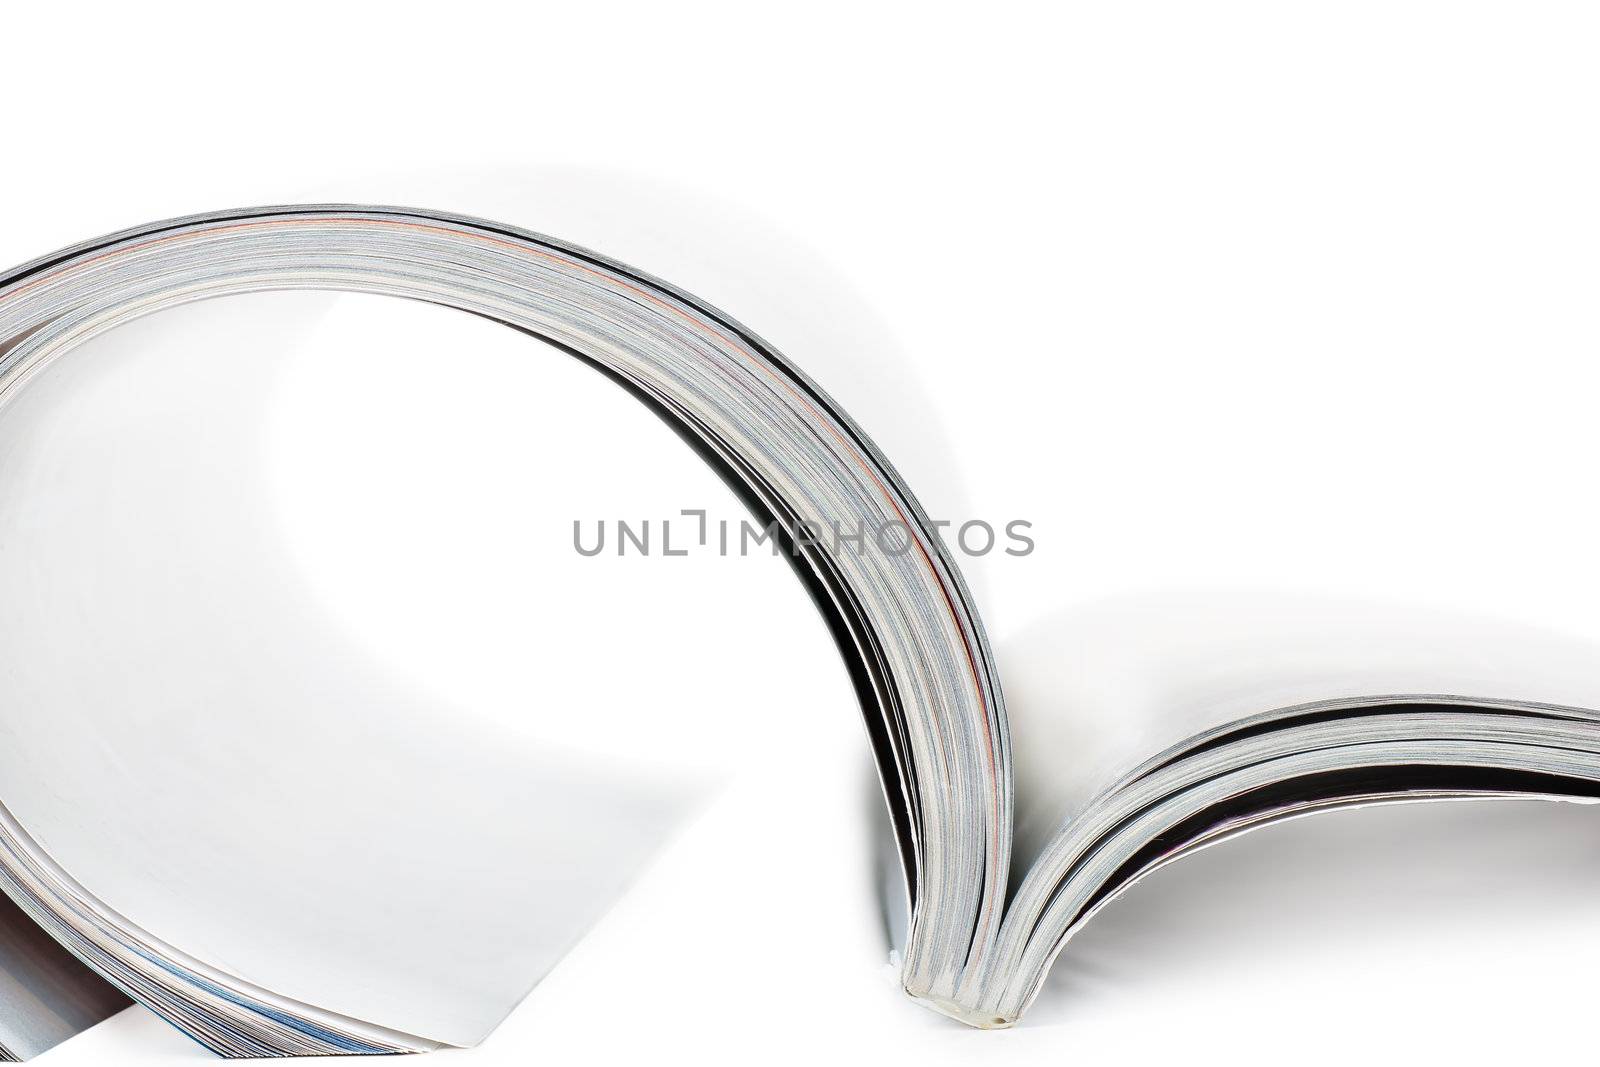 Selective focus image of magazine in profile